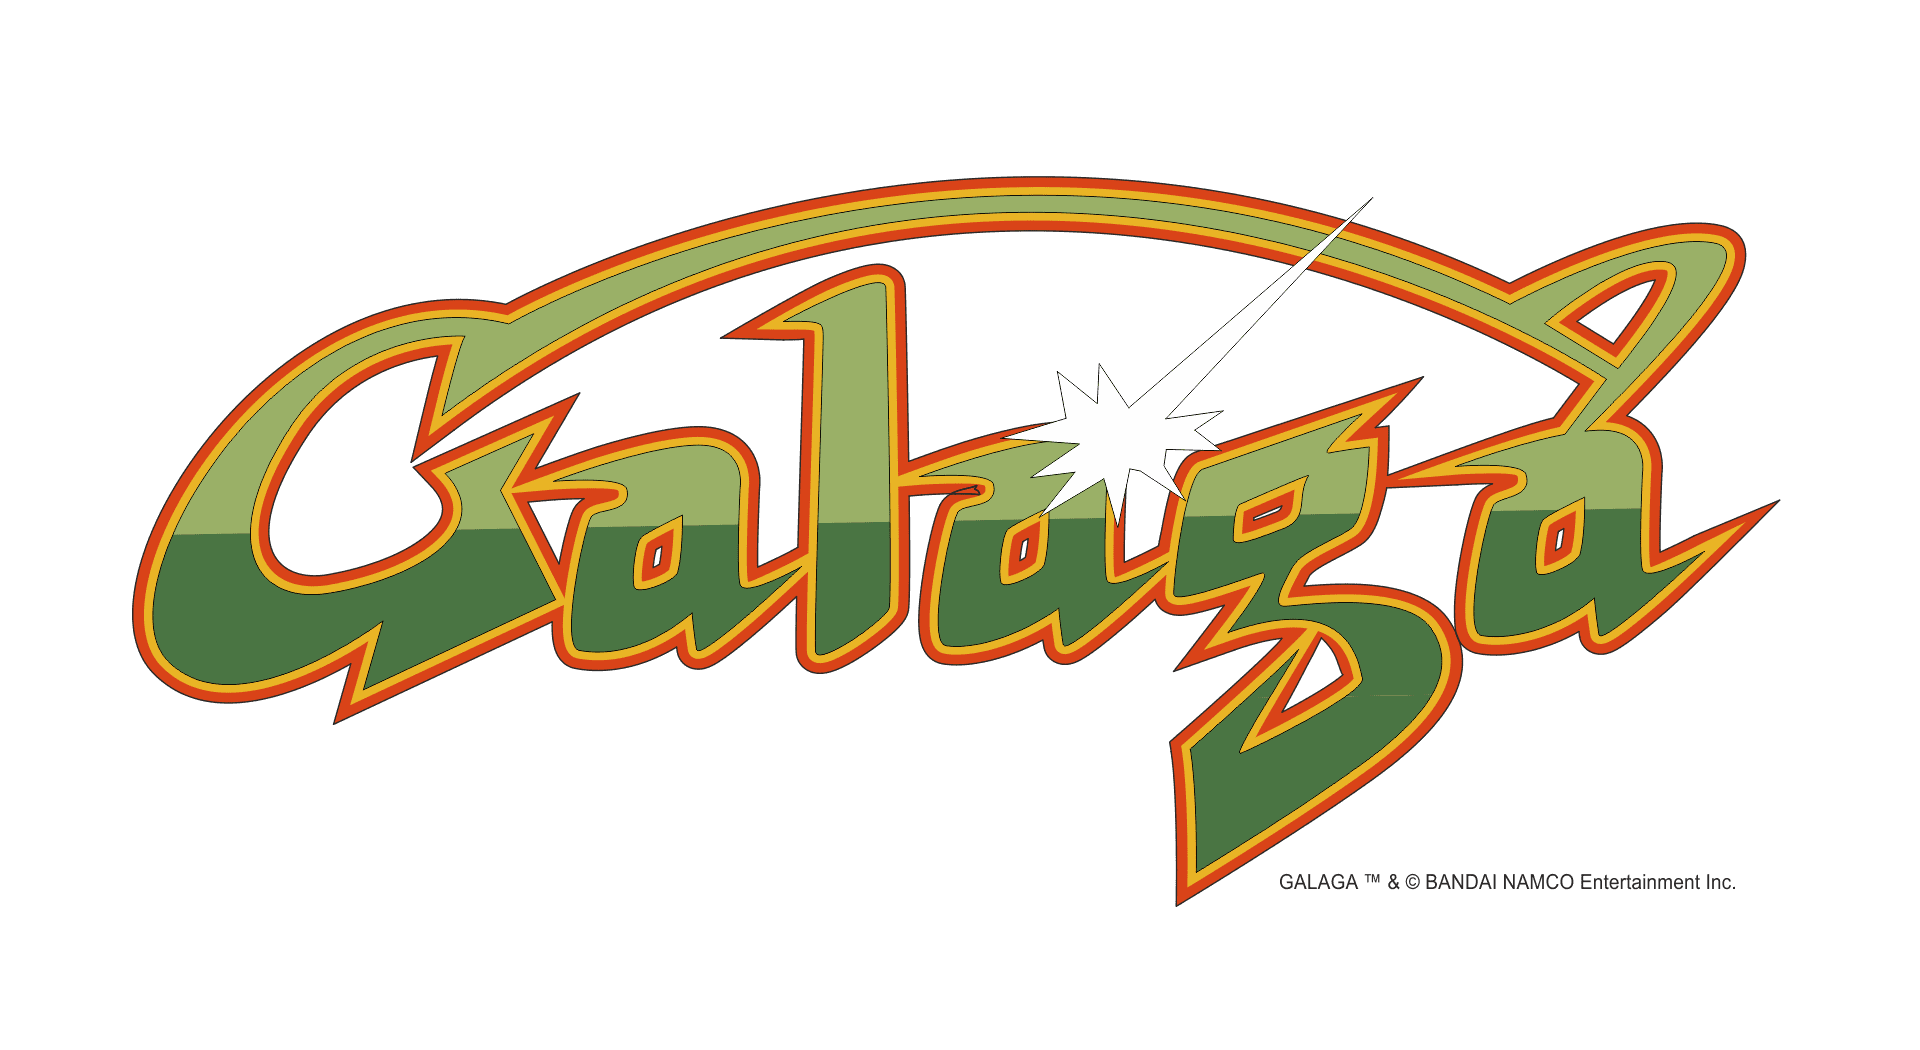 Galaga Gets Set For Animated Series